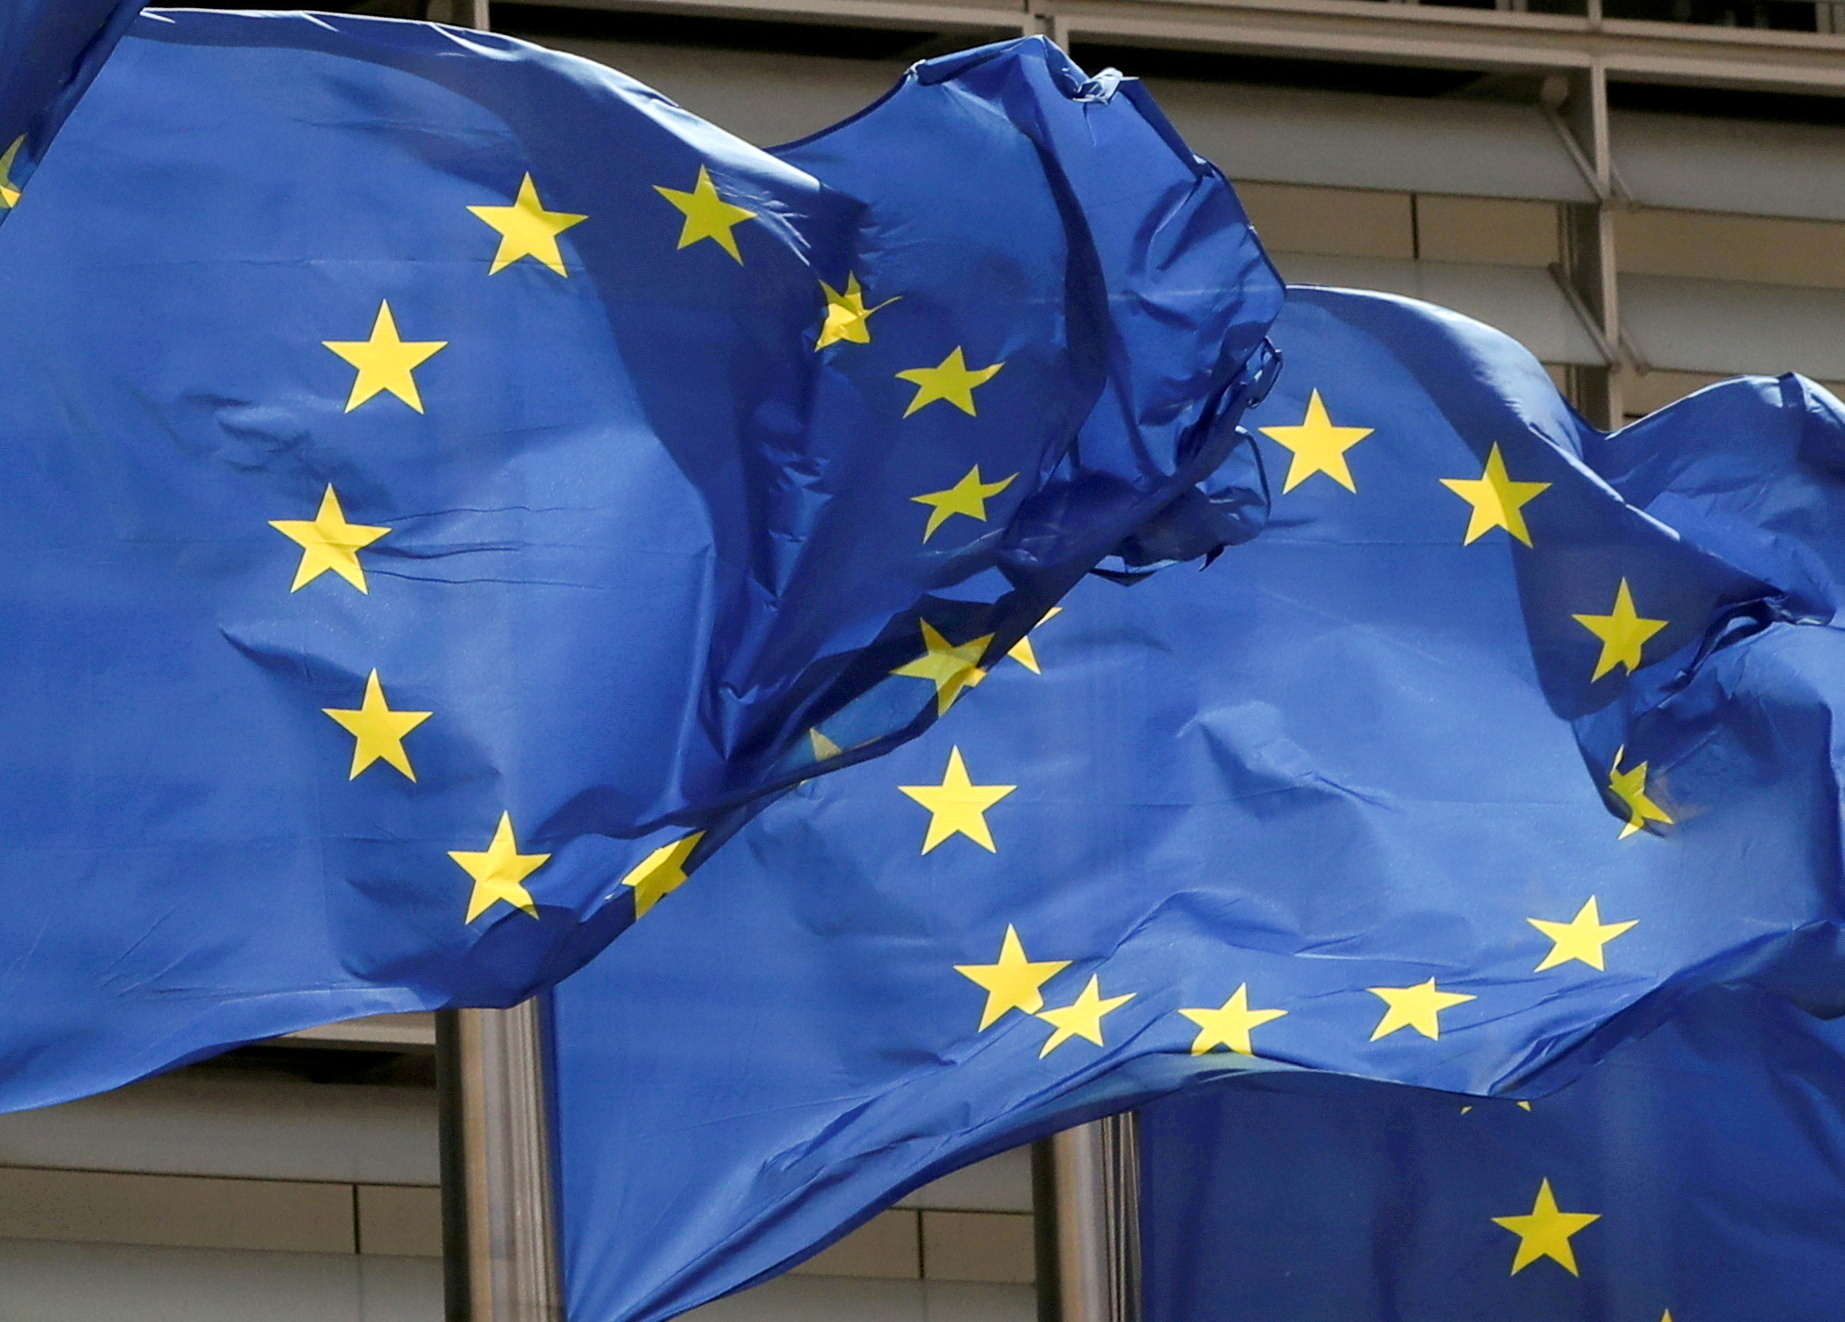 European Union (EU) flags flutter outside the EU Commission headquarters in Brussels, Belgium, on May 5, 2021, and on July 5, 2022, the bloc has invited Bongbong Marcos to visit Brussels.